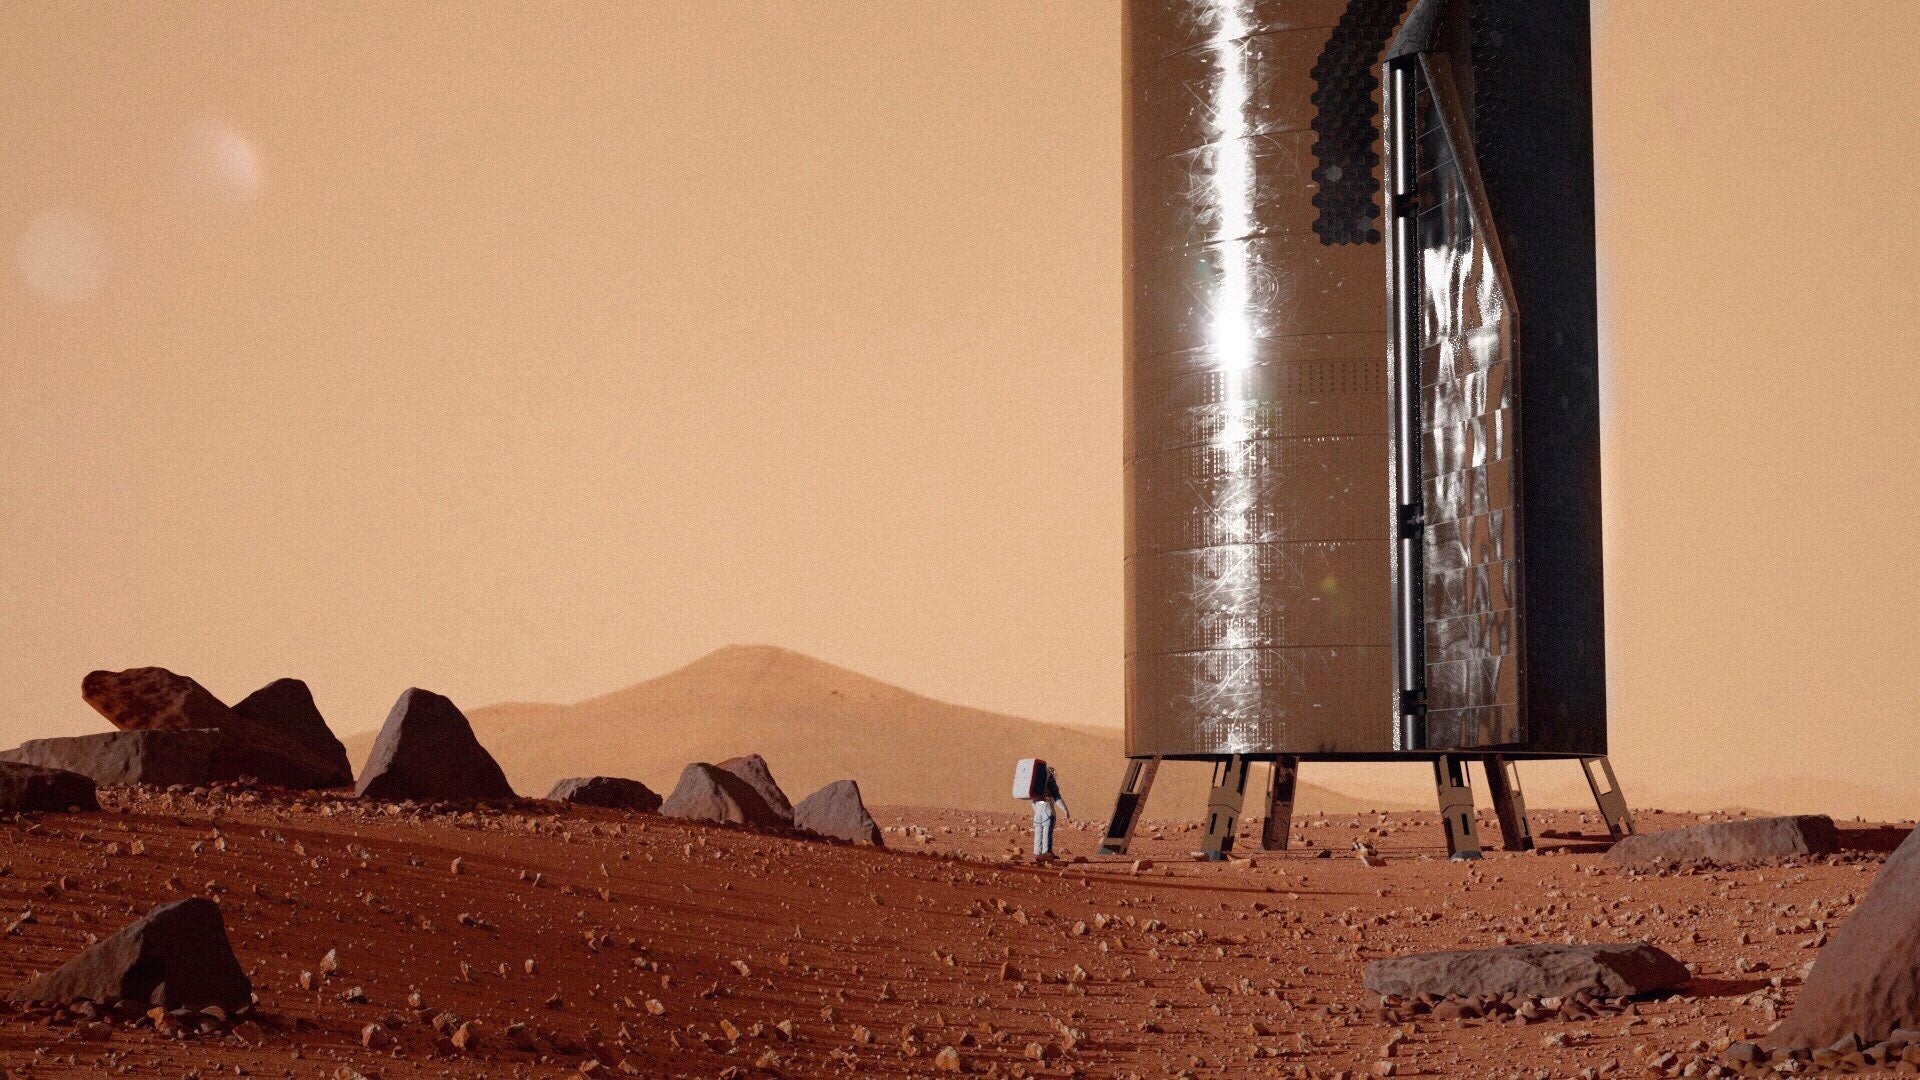 Elon Musk Suggests SpaceX Plans To Land A Starship On Mars Within 5 Years